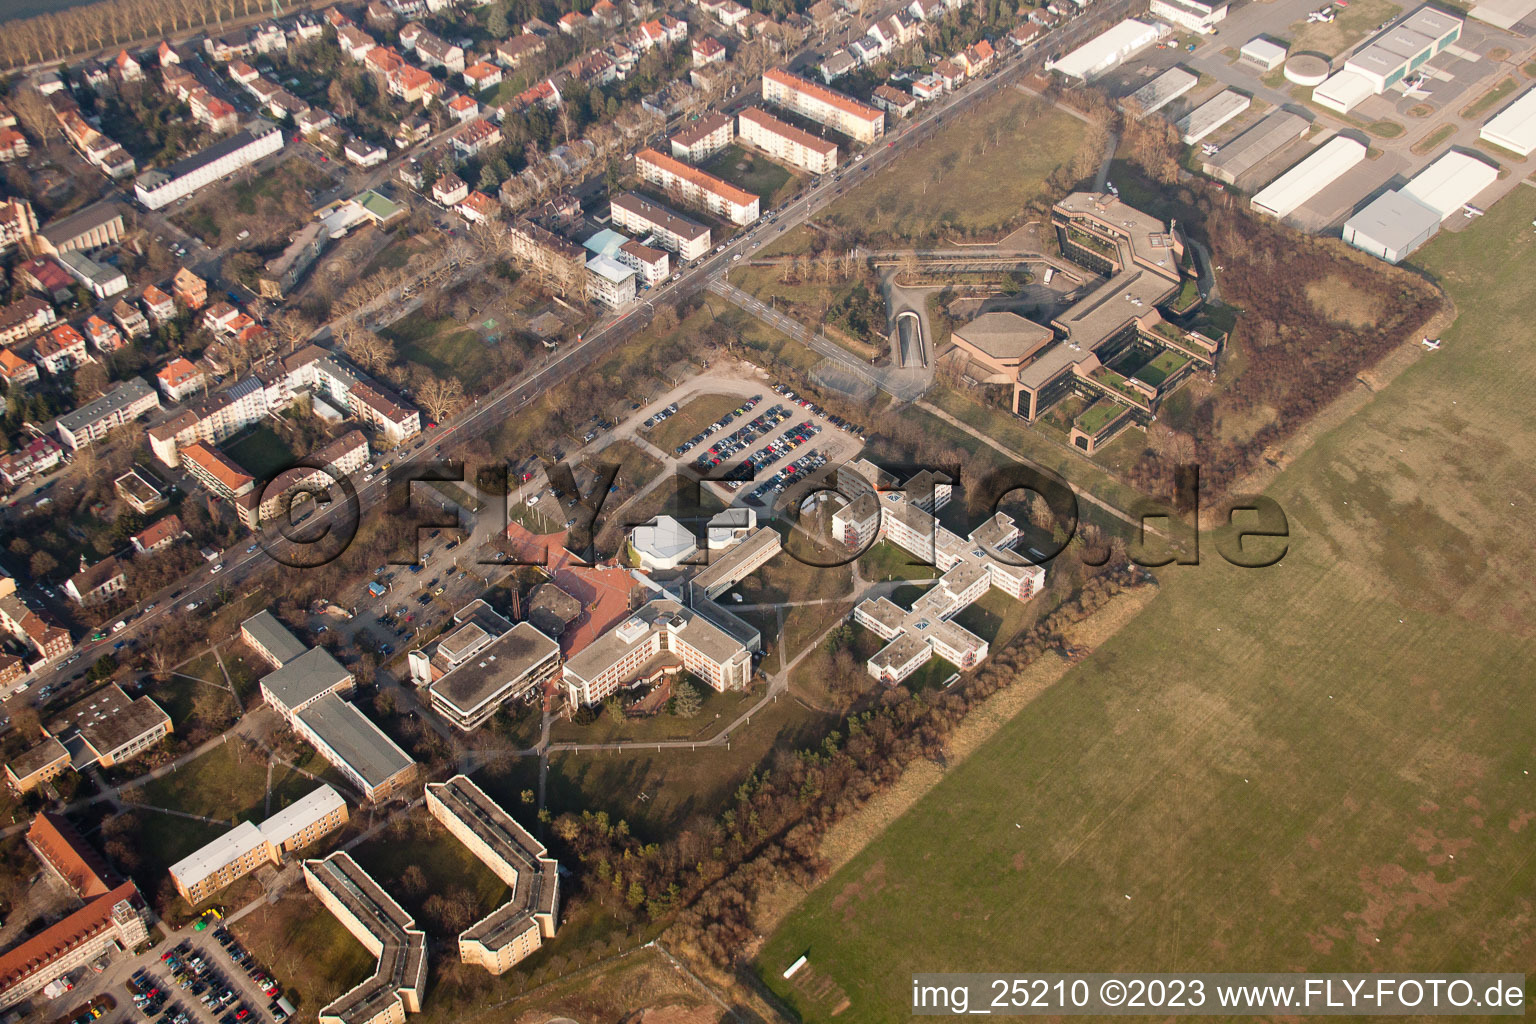 Aerial view of Bundeswehr training center in the district Neuostheim in Mannheim in the state Baden-Wuerttemberg, Germany